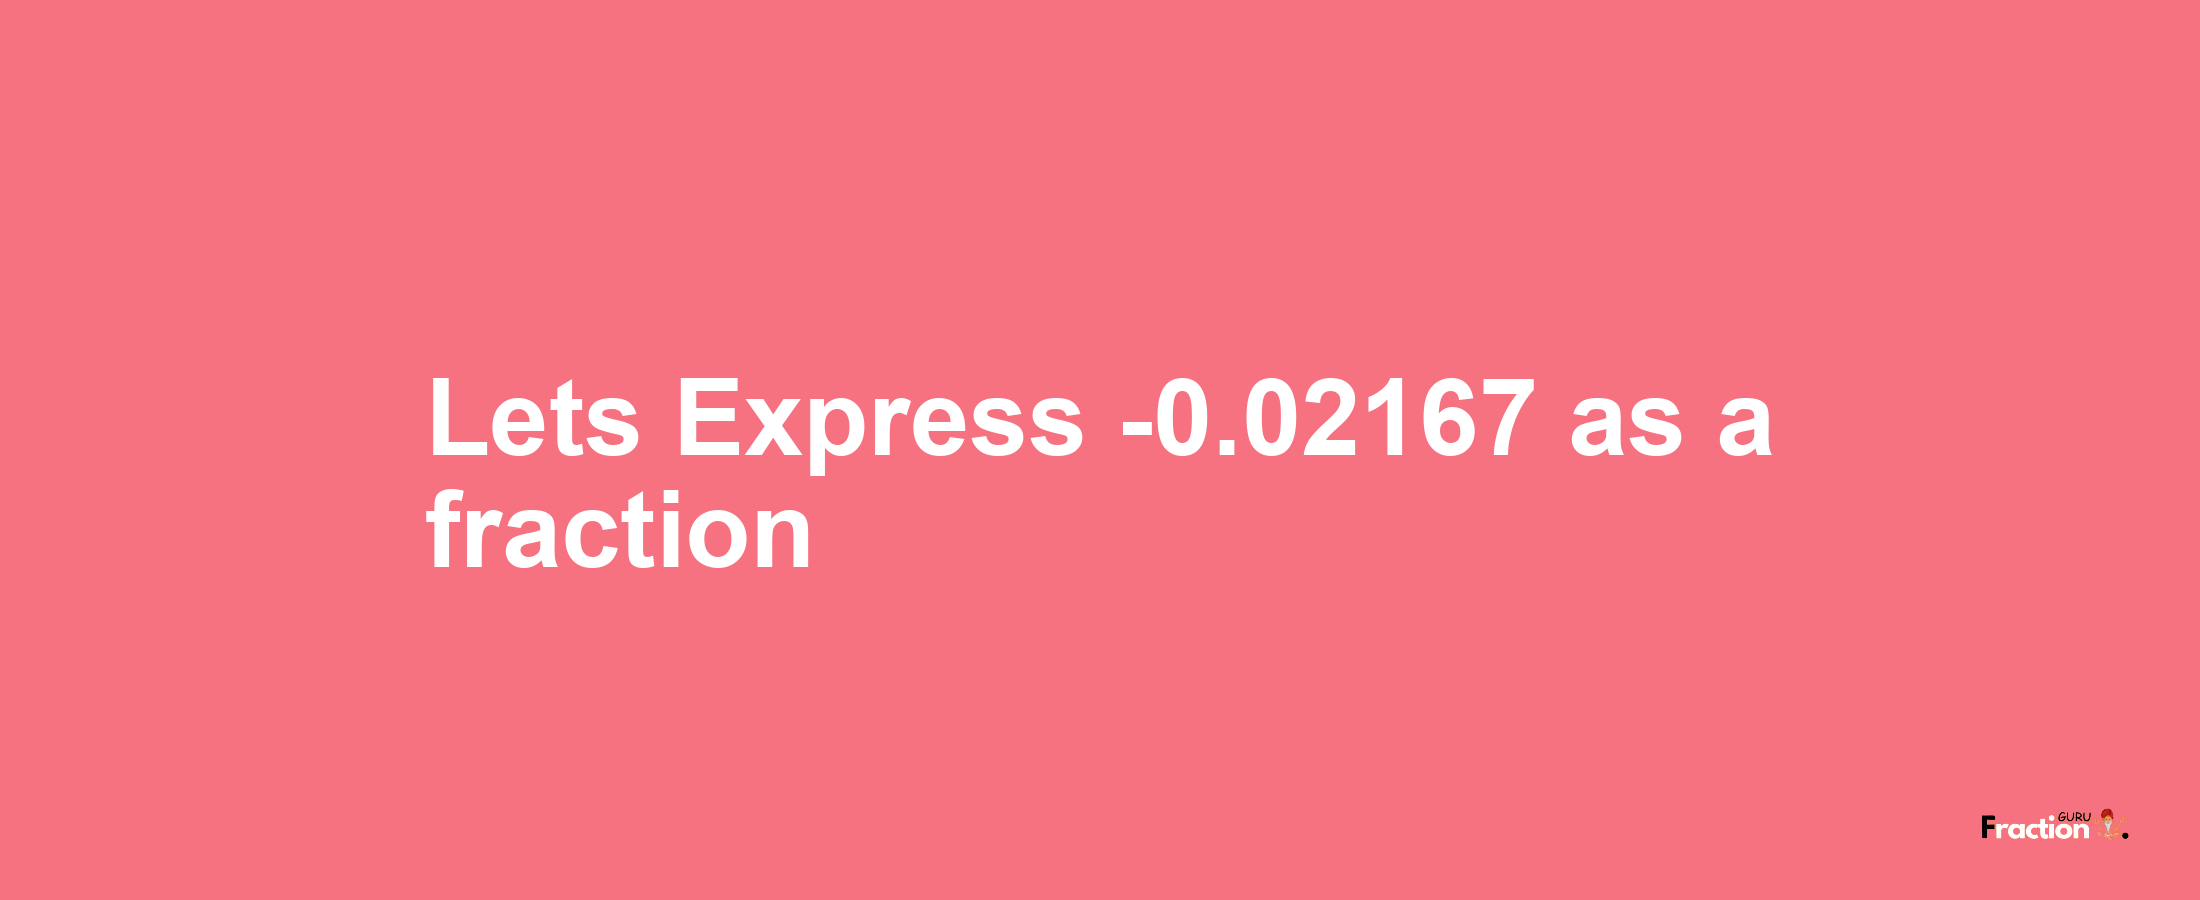 Lets Express -0.02167 as afraction